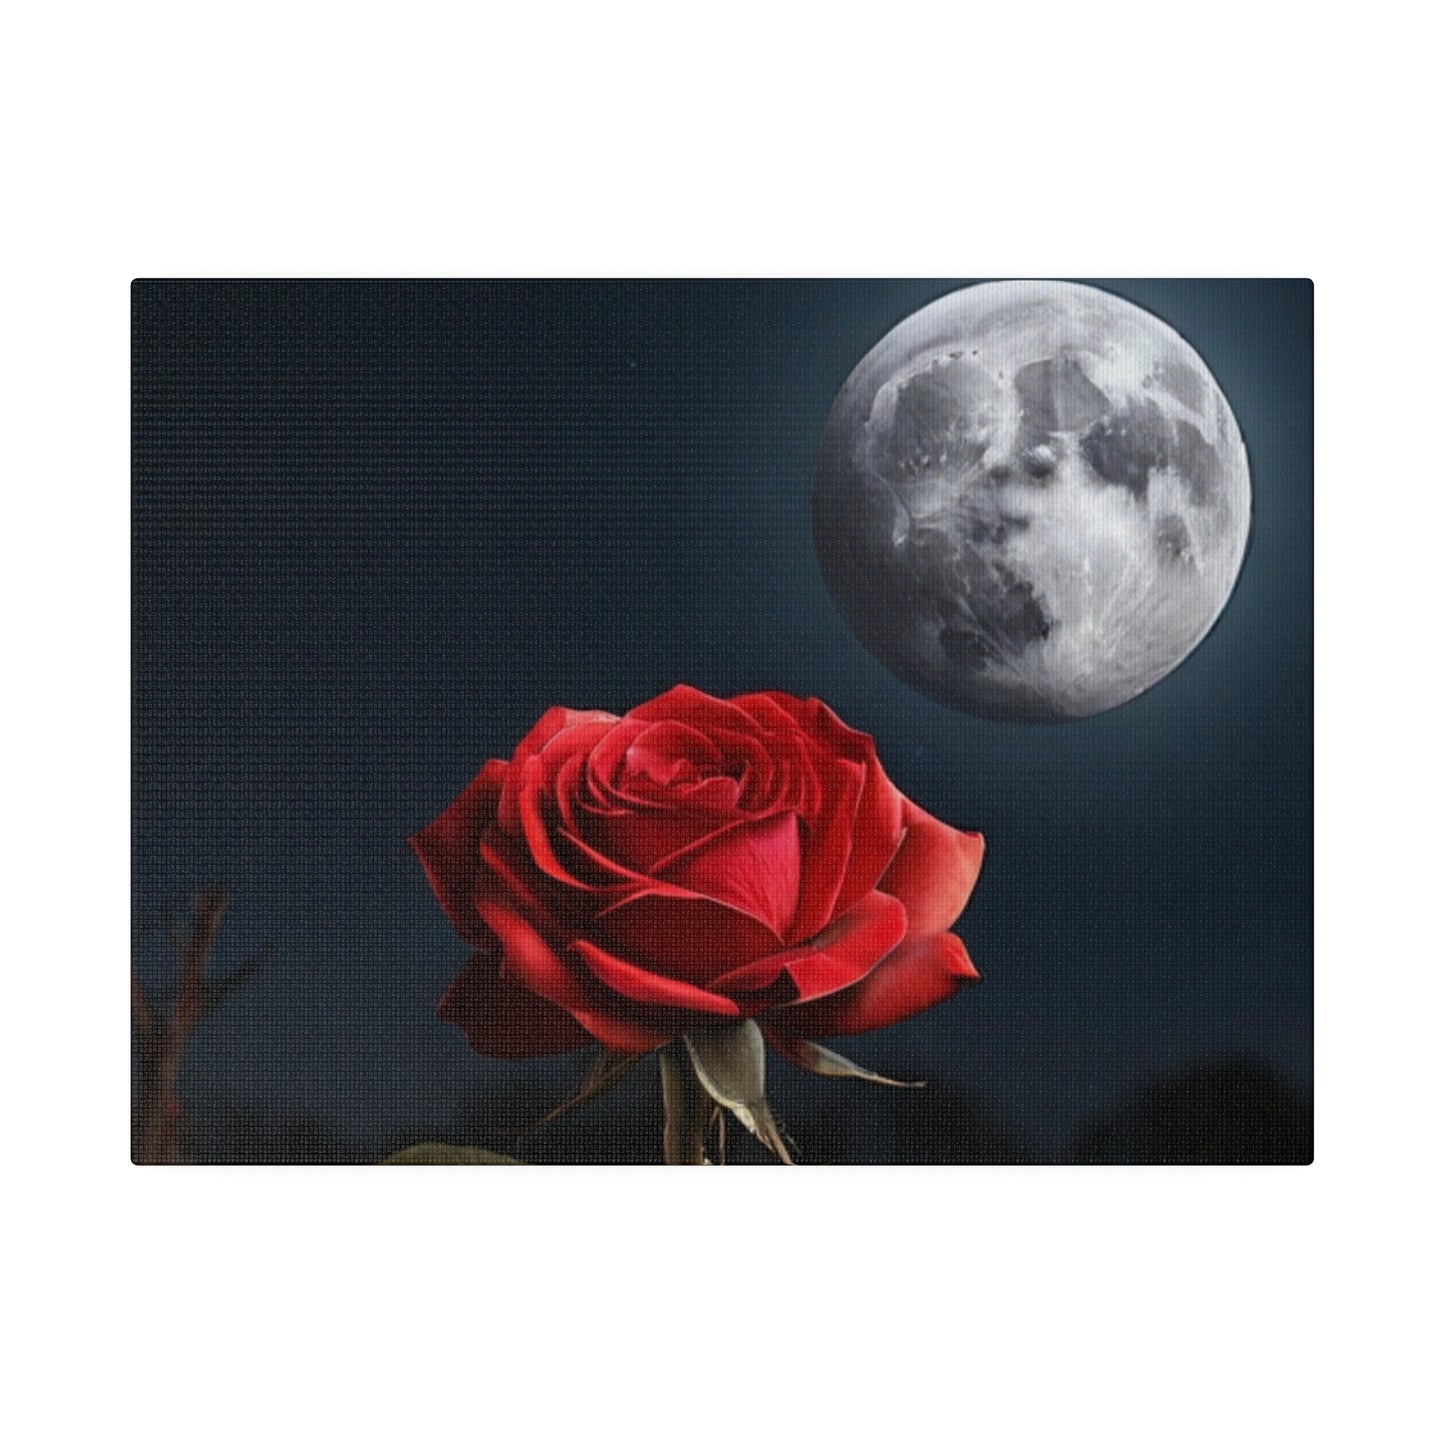 Red Rose Under Moonlight - Matte Canvas, Stretched, 0.75"